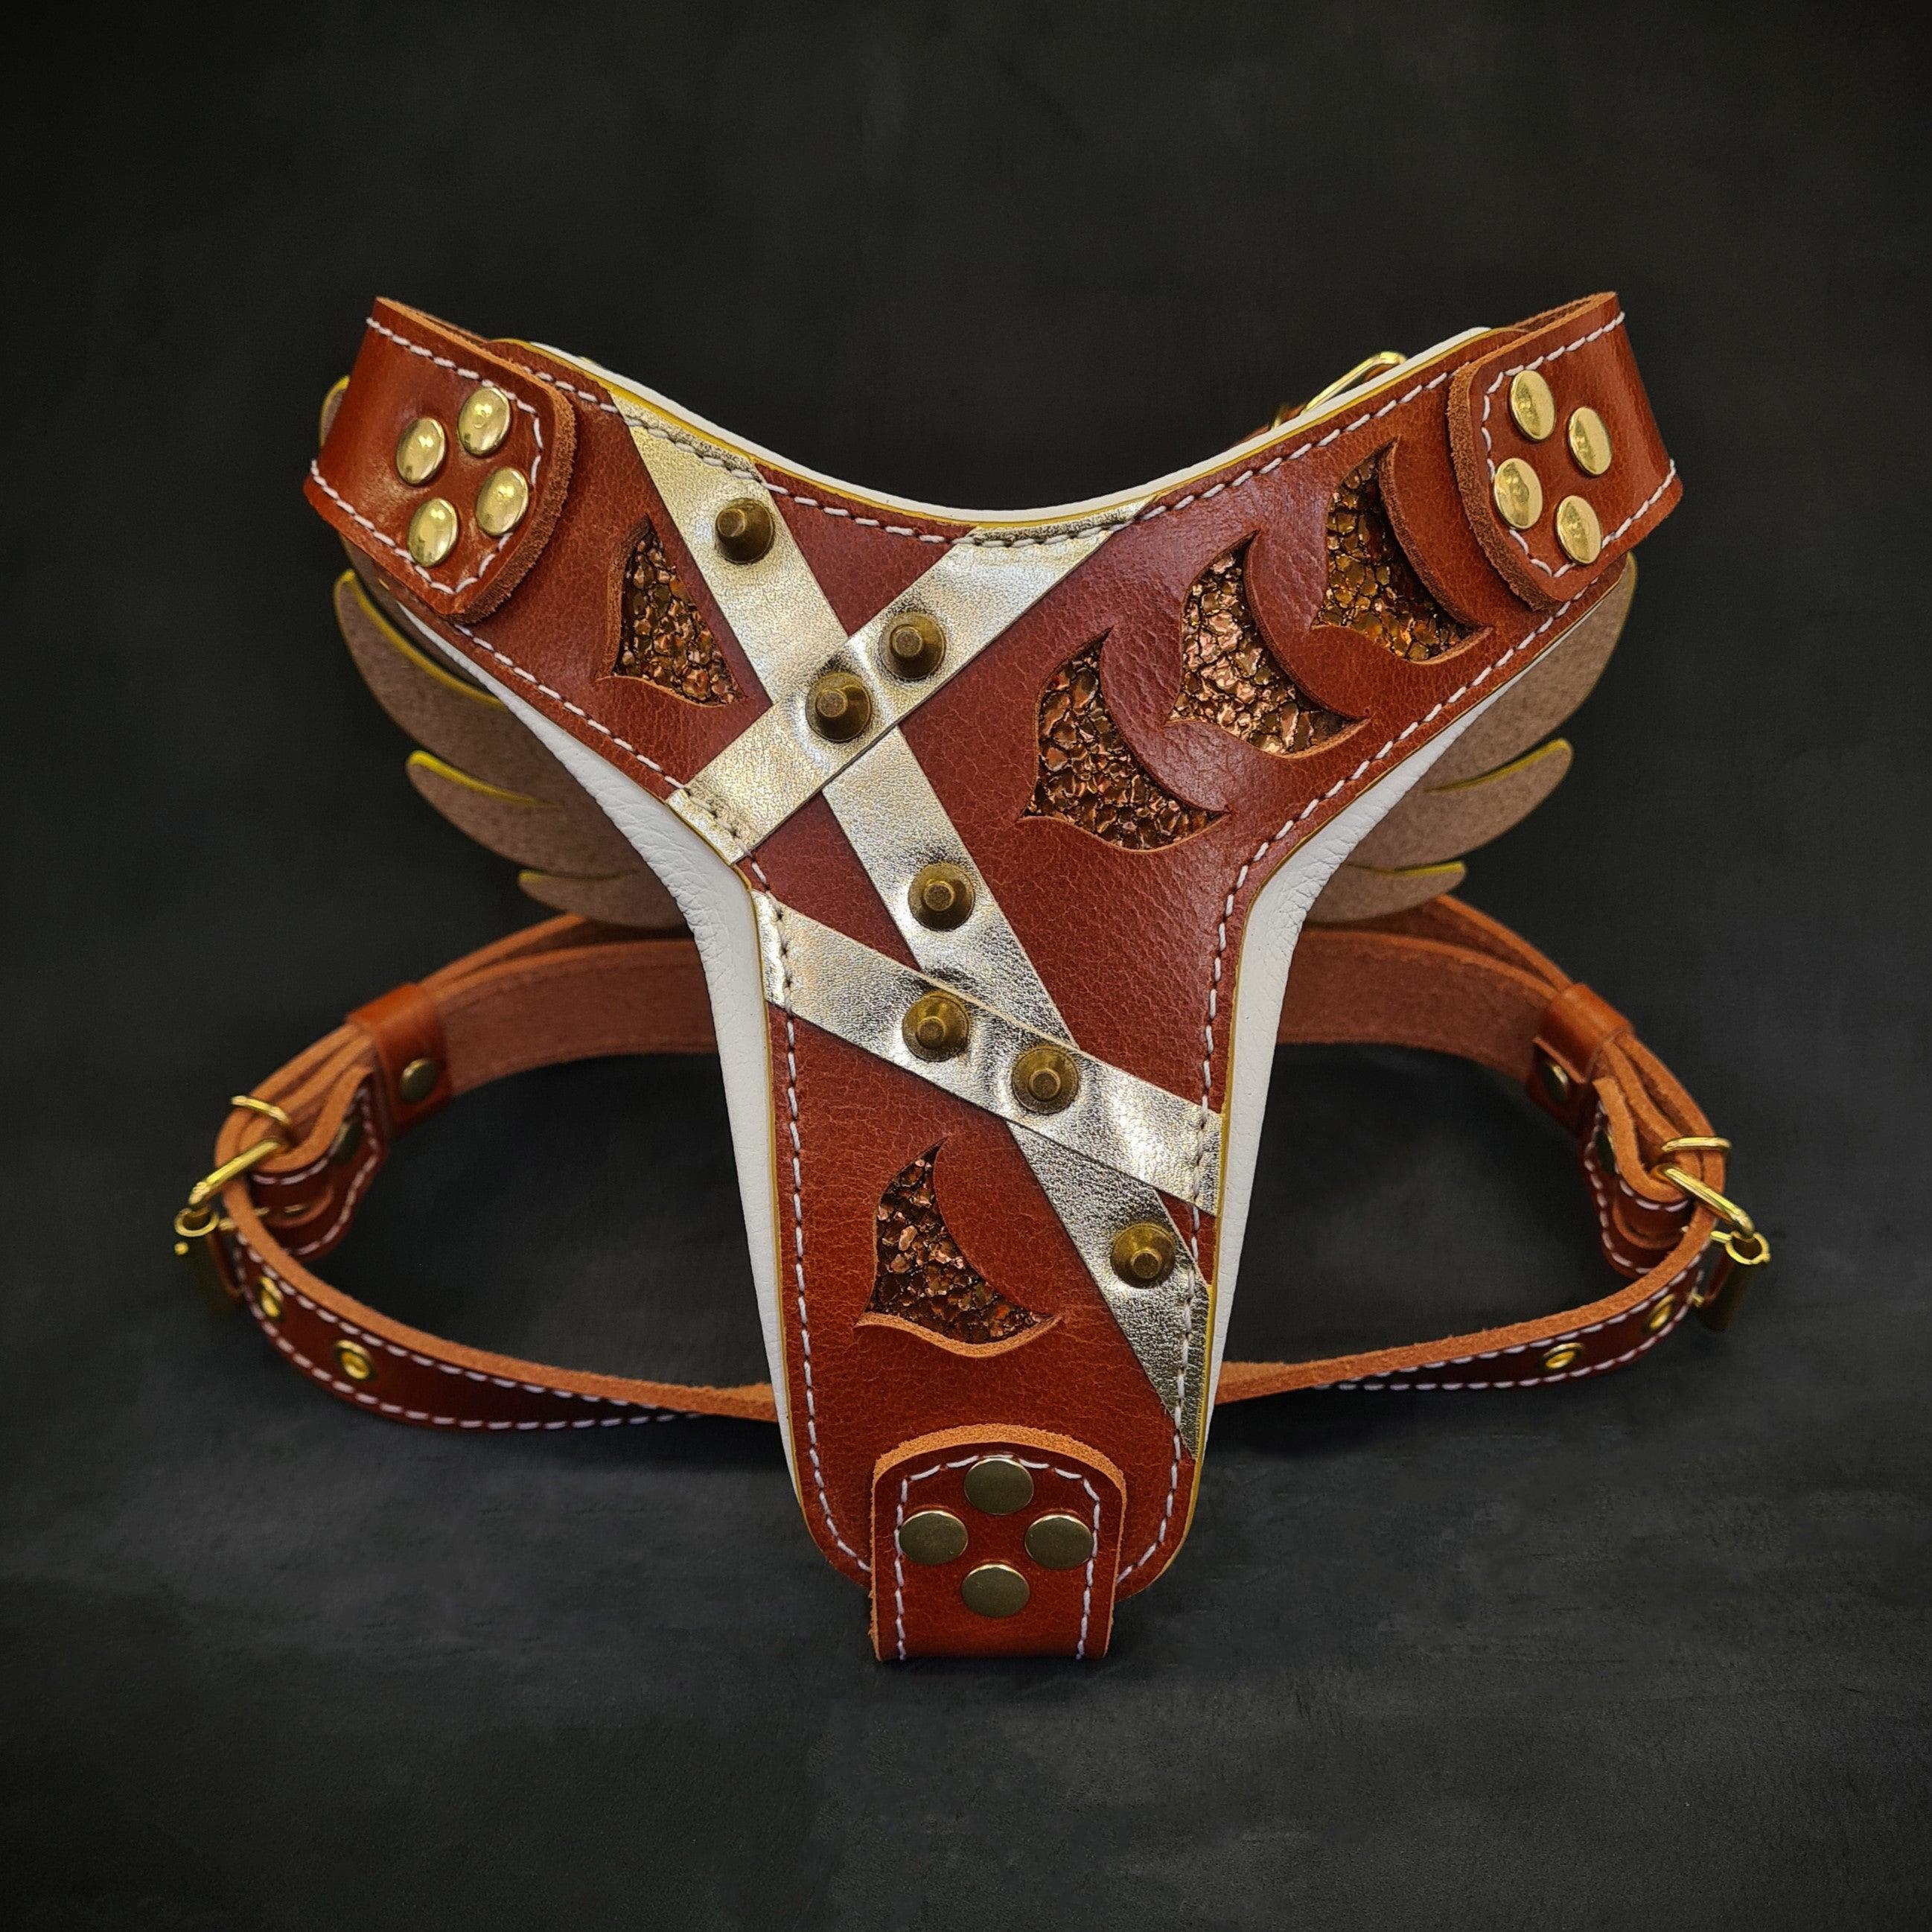 The Hermes Leather Harness: Small to Medium Size - Harnesses - Cuddle Finds